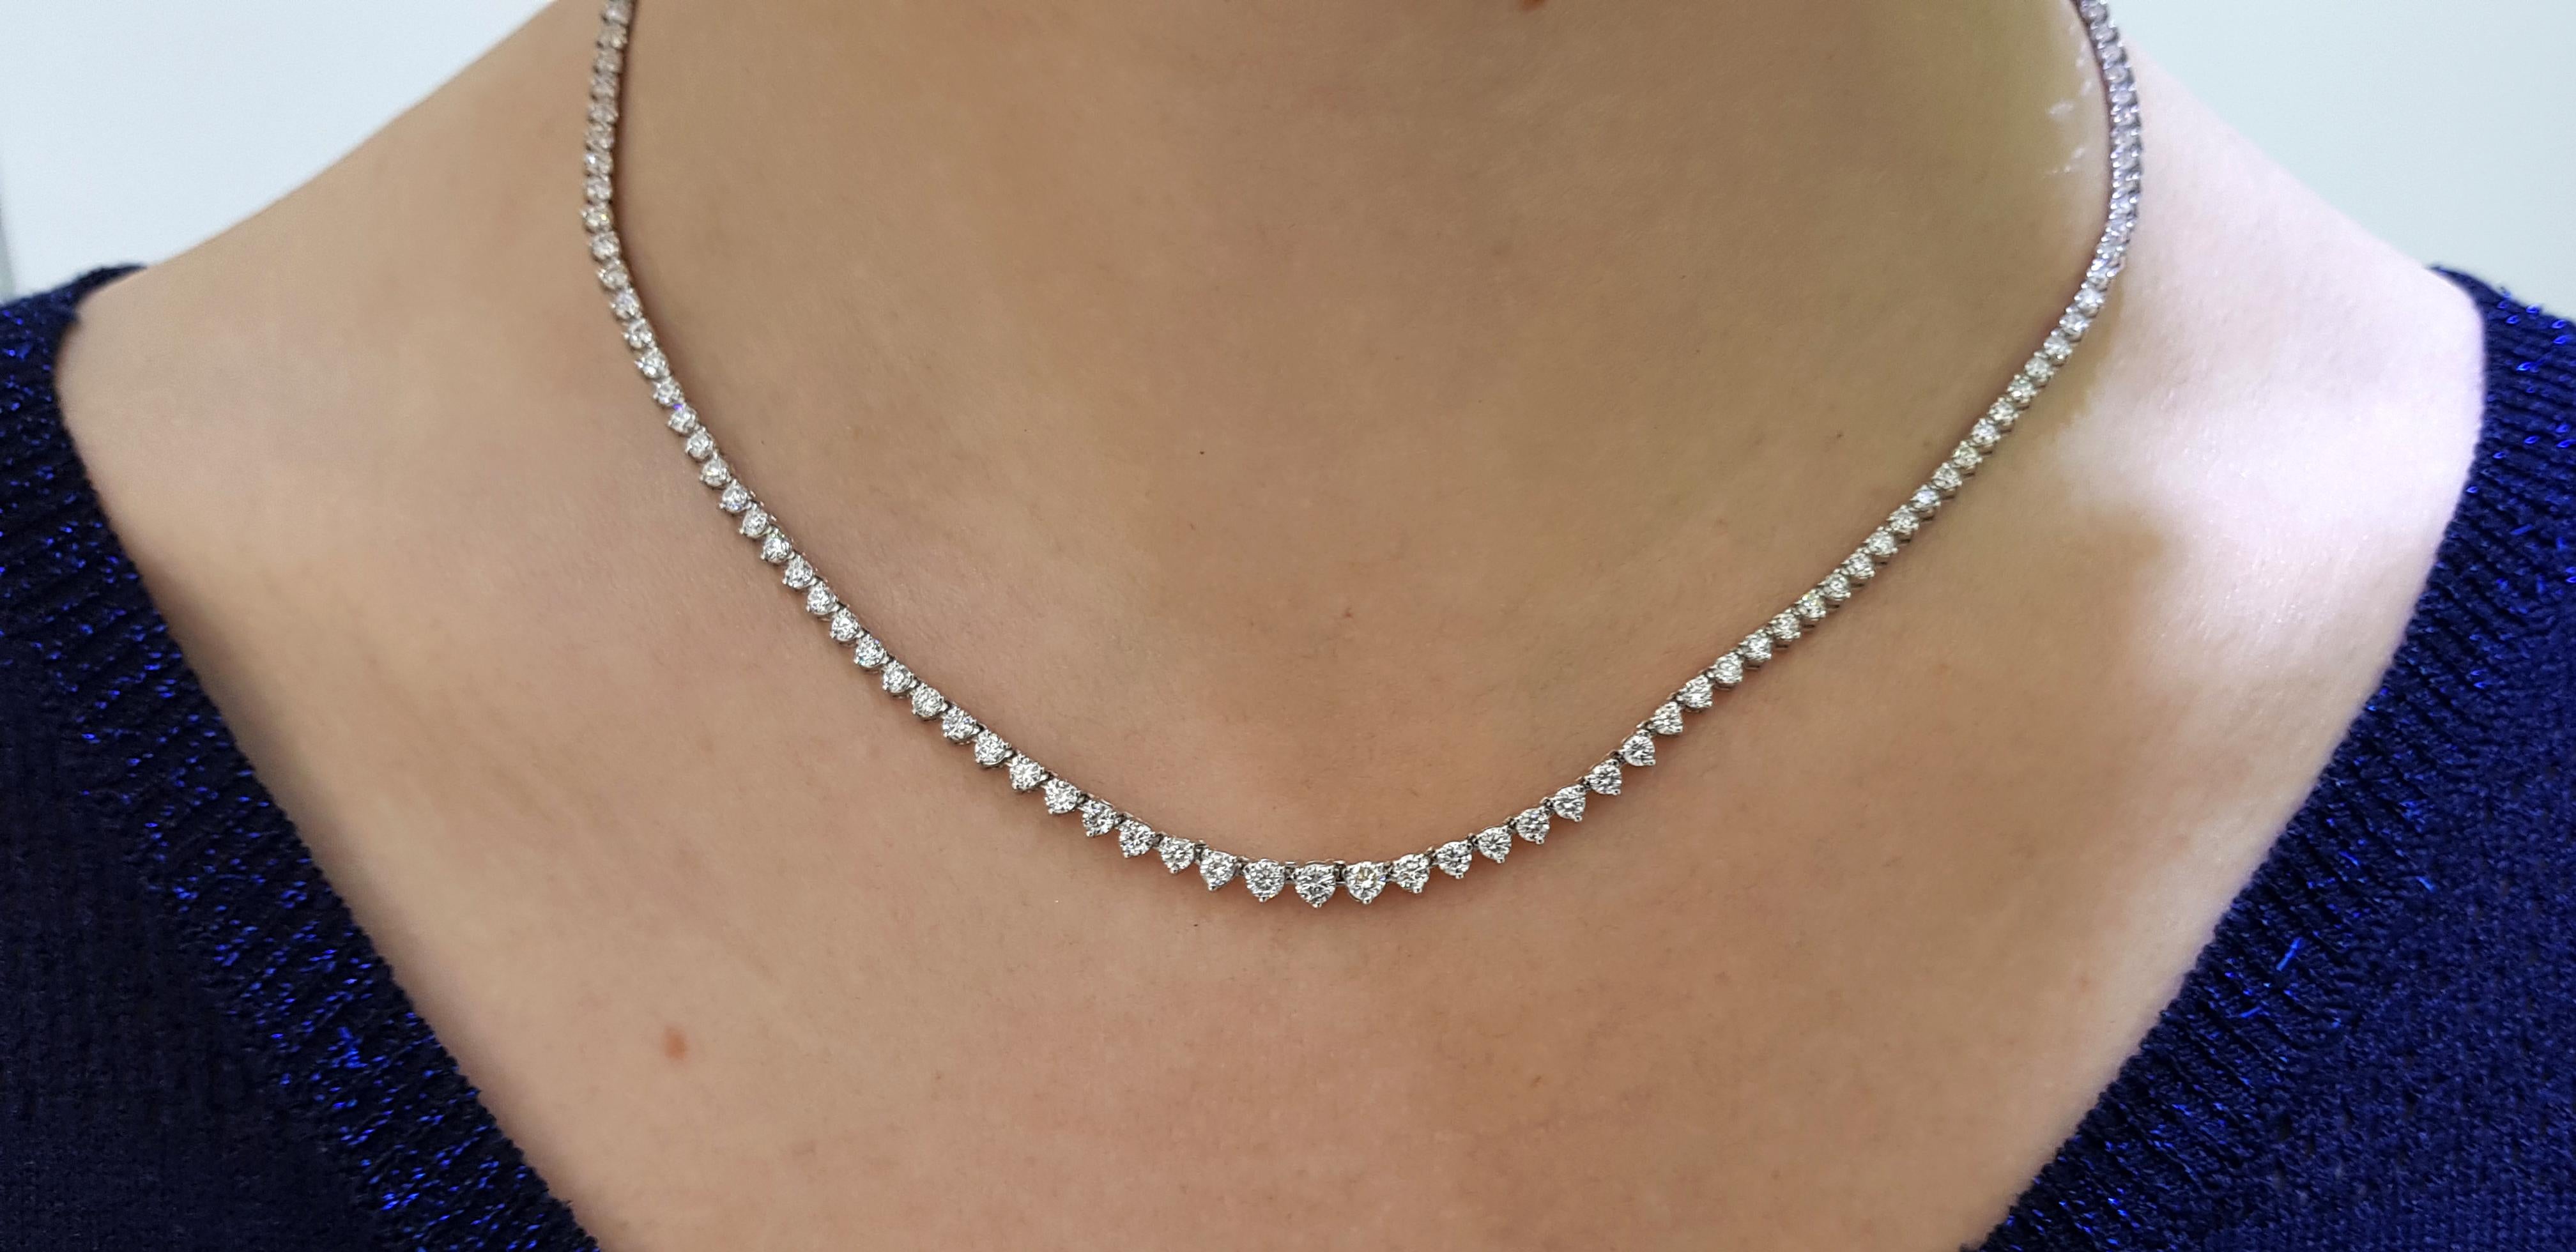 This stunning and impressive Riviera Necklace features total Diamond weight of 5.00 Carat in beautifully graduated Round Brilliant Cut gems with a sparkly white color G/H clarity SI. Each stone has a three claw setting with open gallery and set in